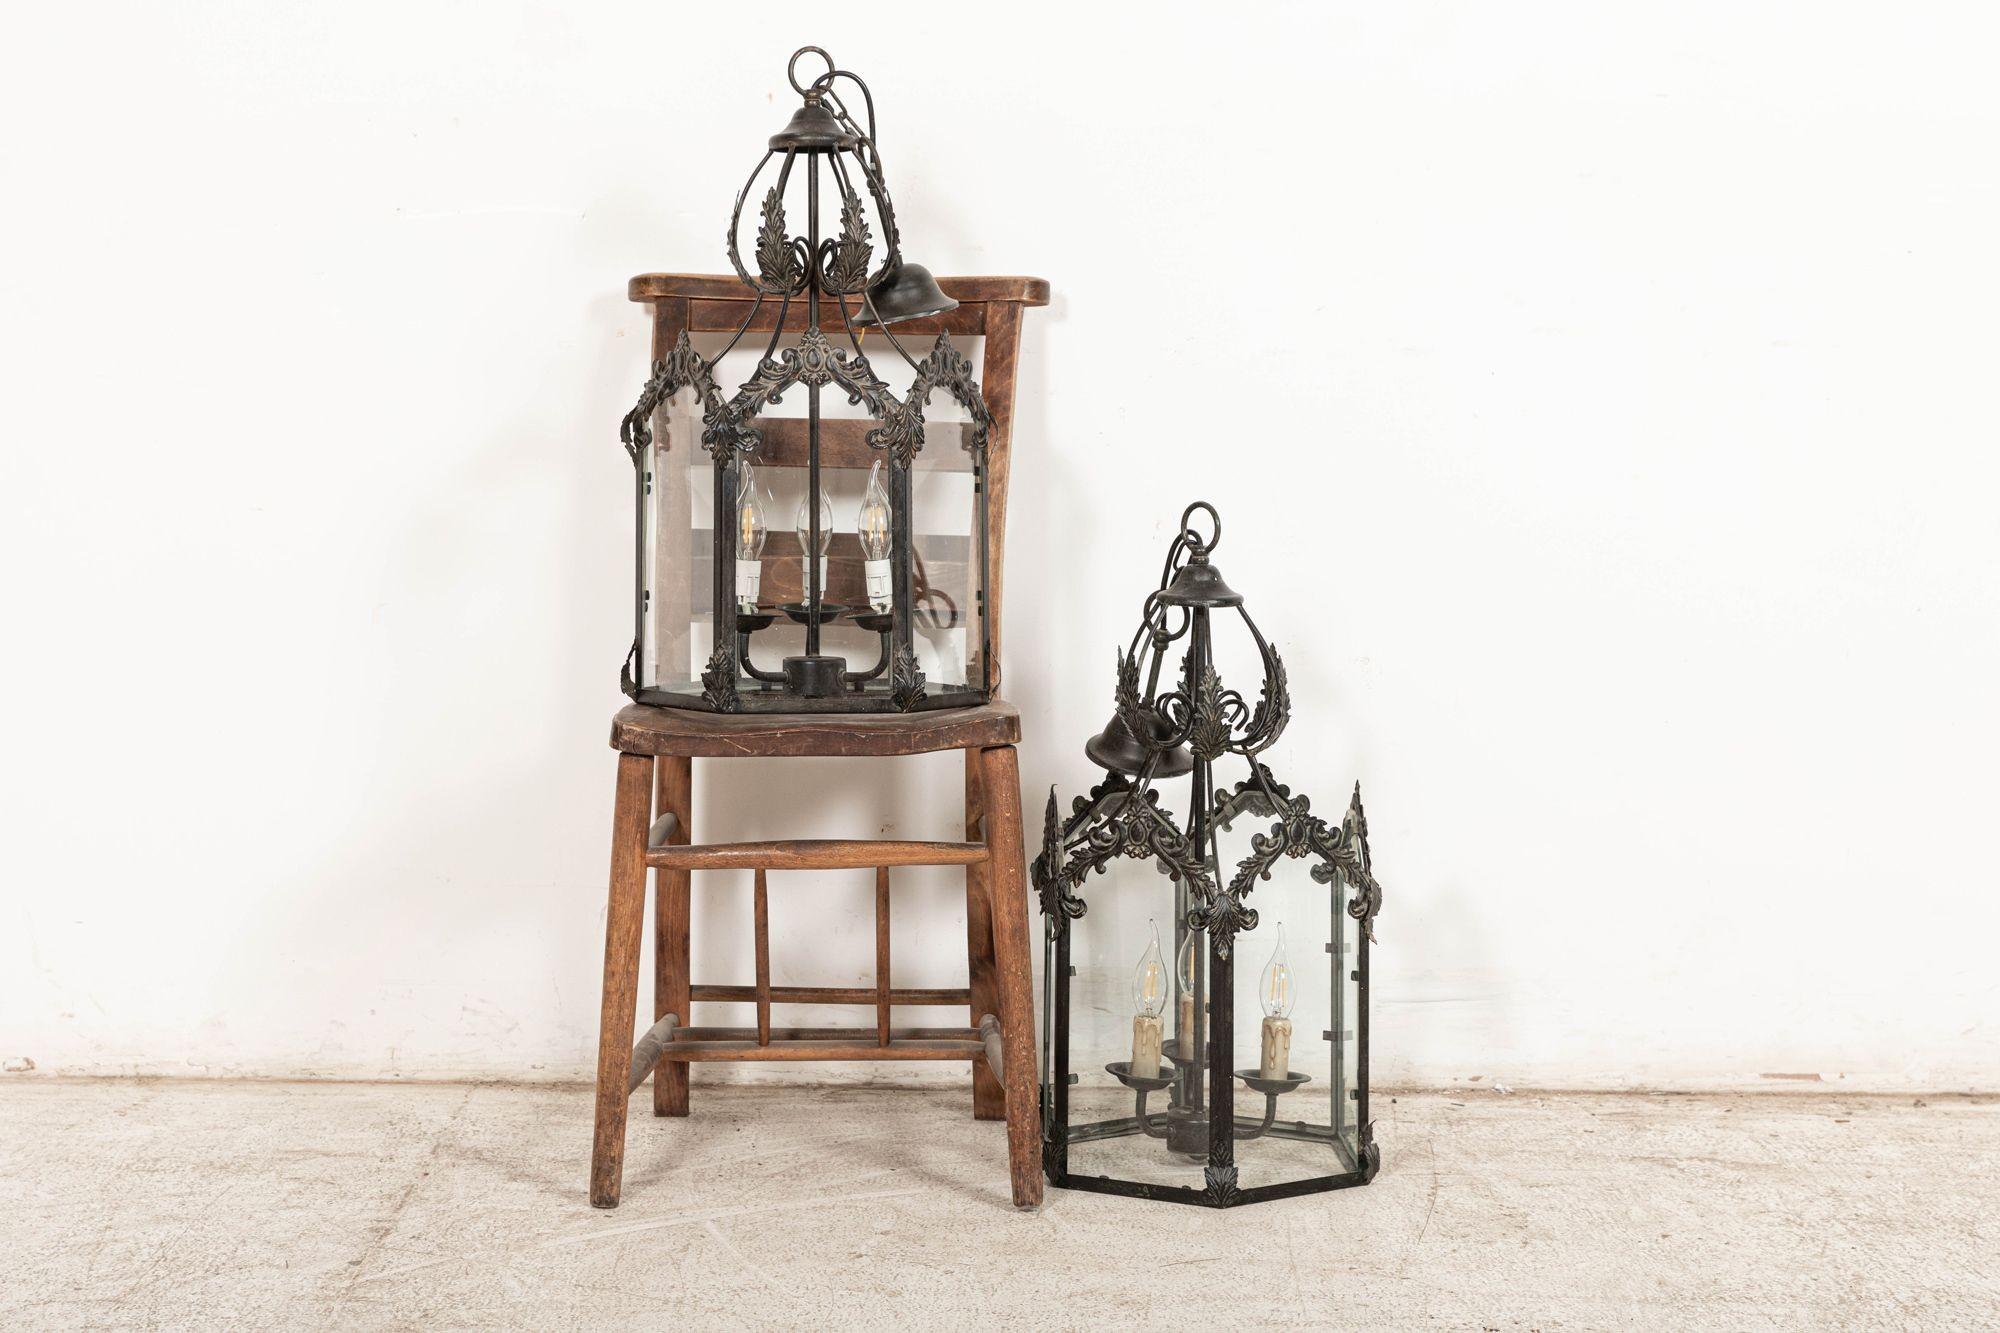 Circa late 20thC
Large Pair Decorative Glazed Hall lanterns
Price is for the pair

Measures: W29 x D29 x H63 cm.